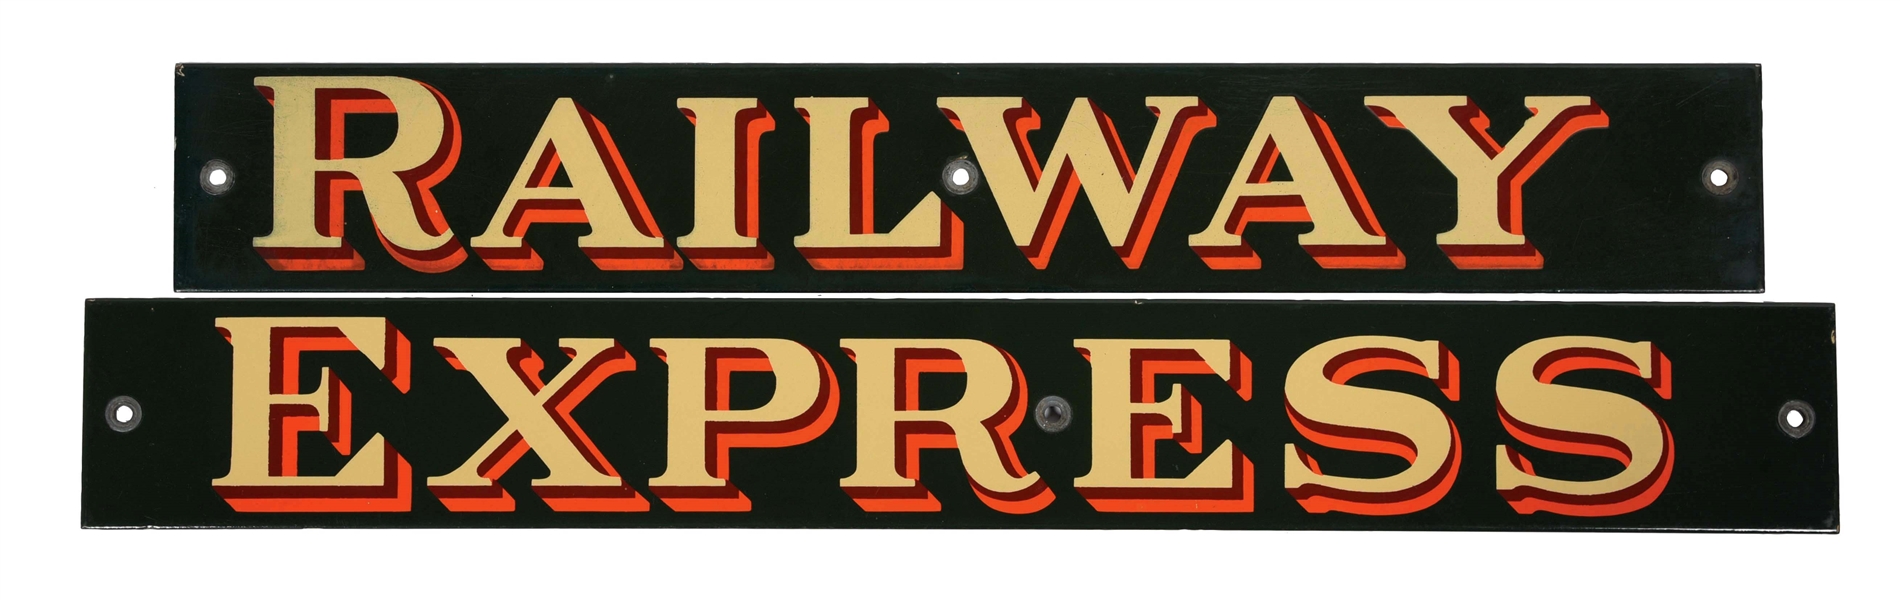 RAILWAY EXPRESS TWO PIECE PORCELAIN SIGN. 